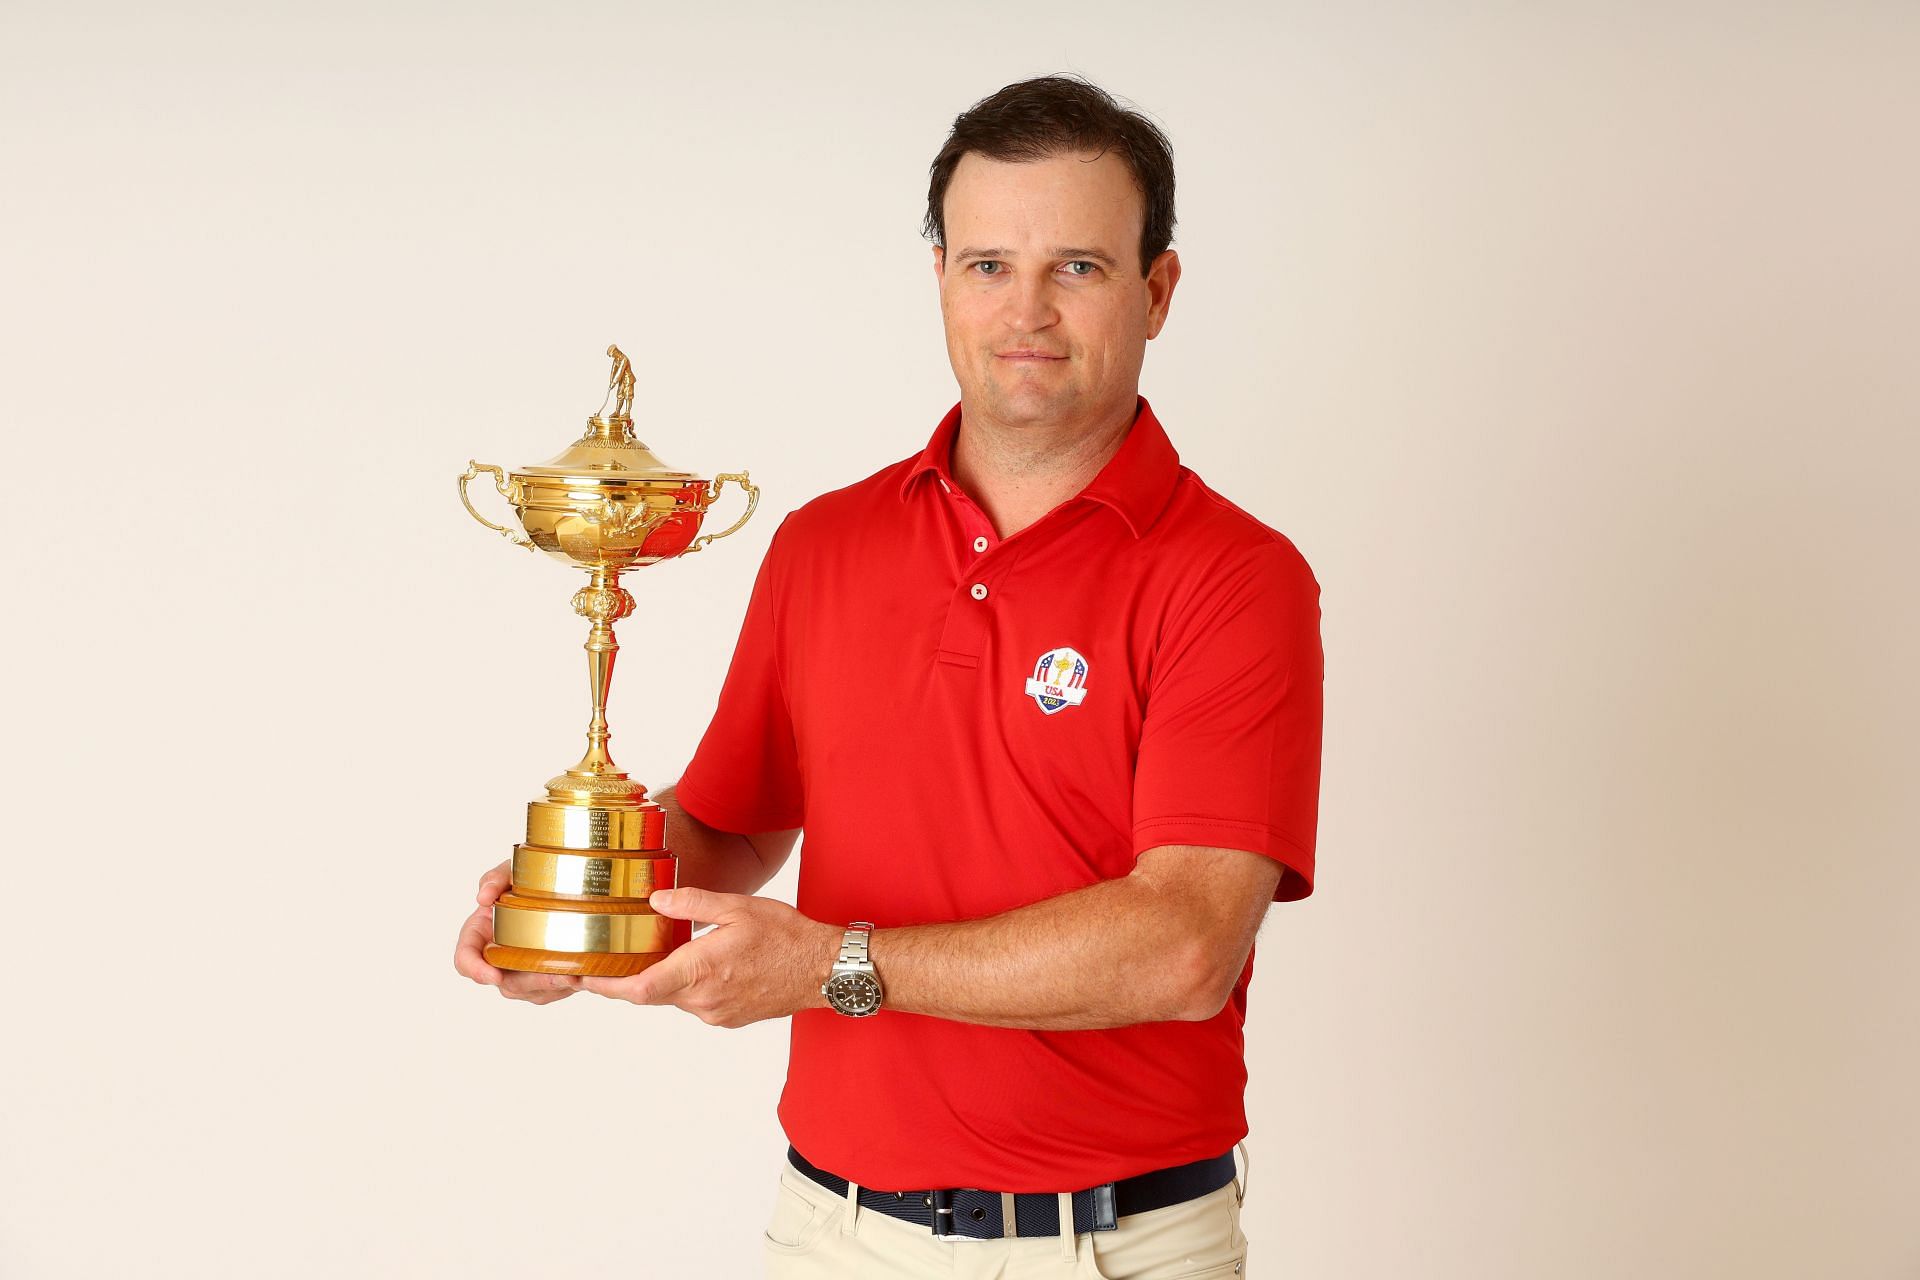 Team USA captain Zach Johnson poses with 2023 Ryder Cup trophy (Image via Getty)